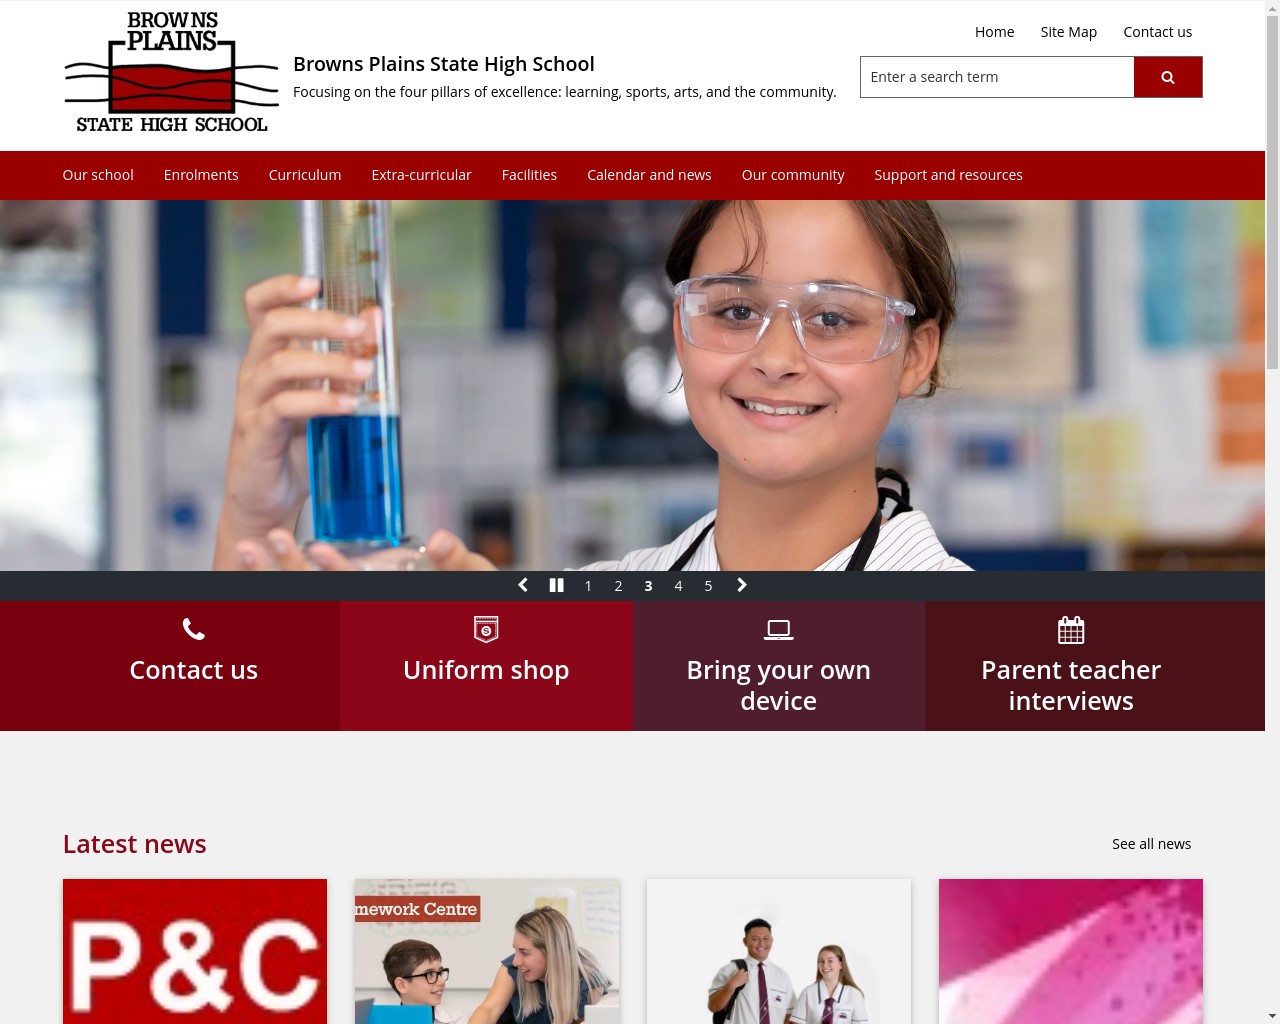 Browns Plains State High School